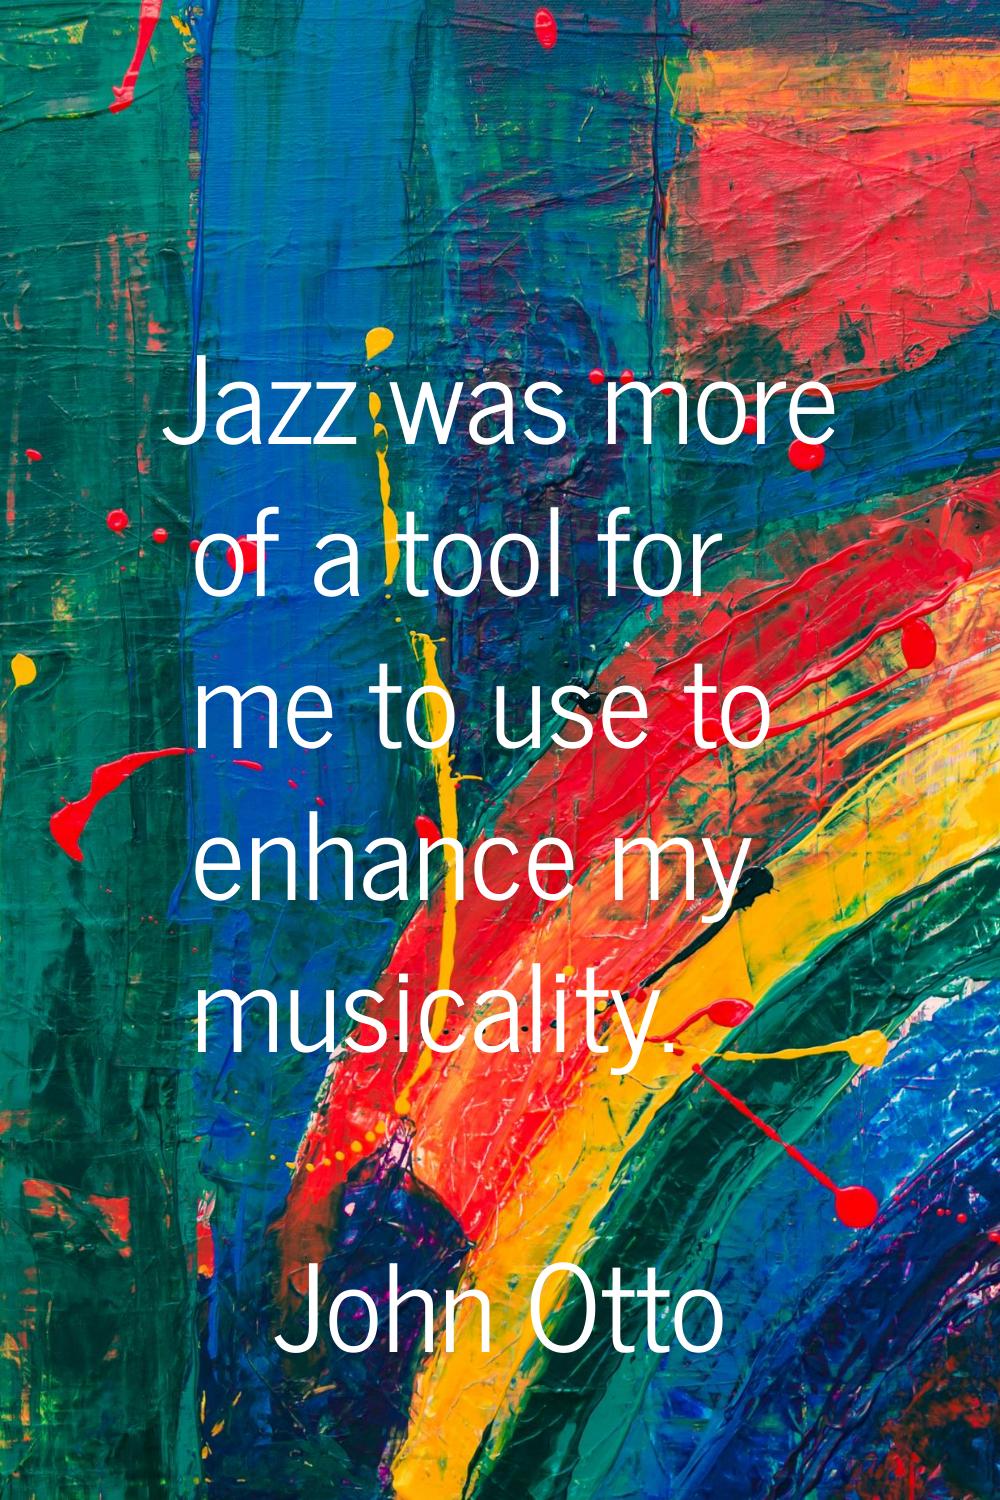 Jazz was more of a tool for me to use to enhance my musicality.